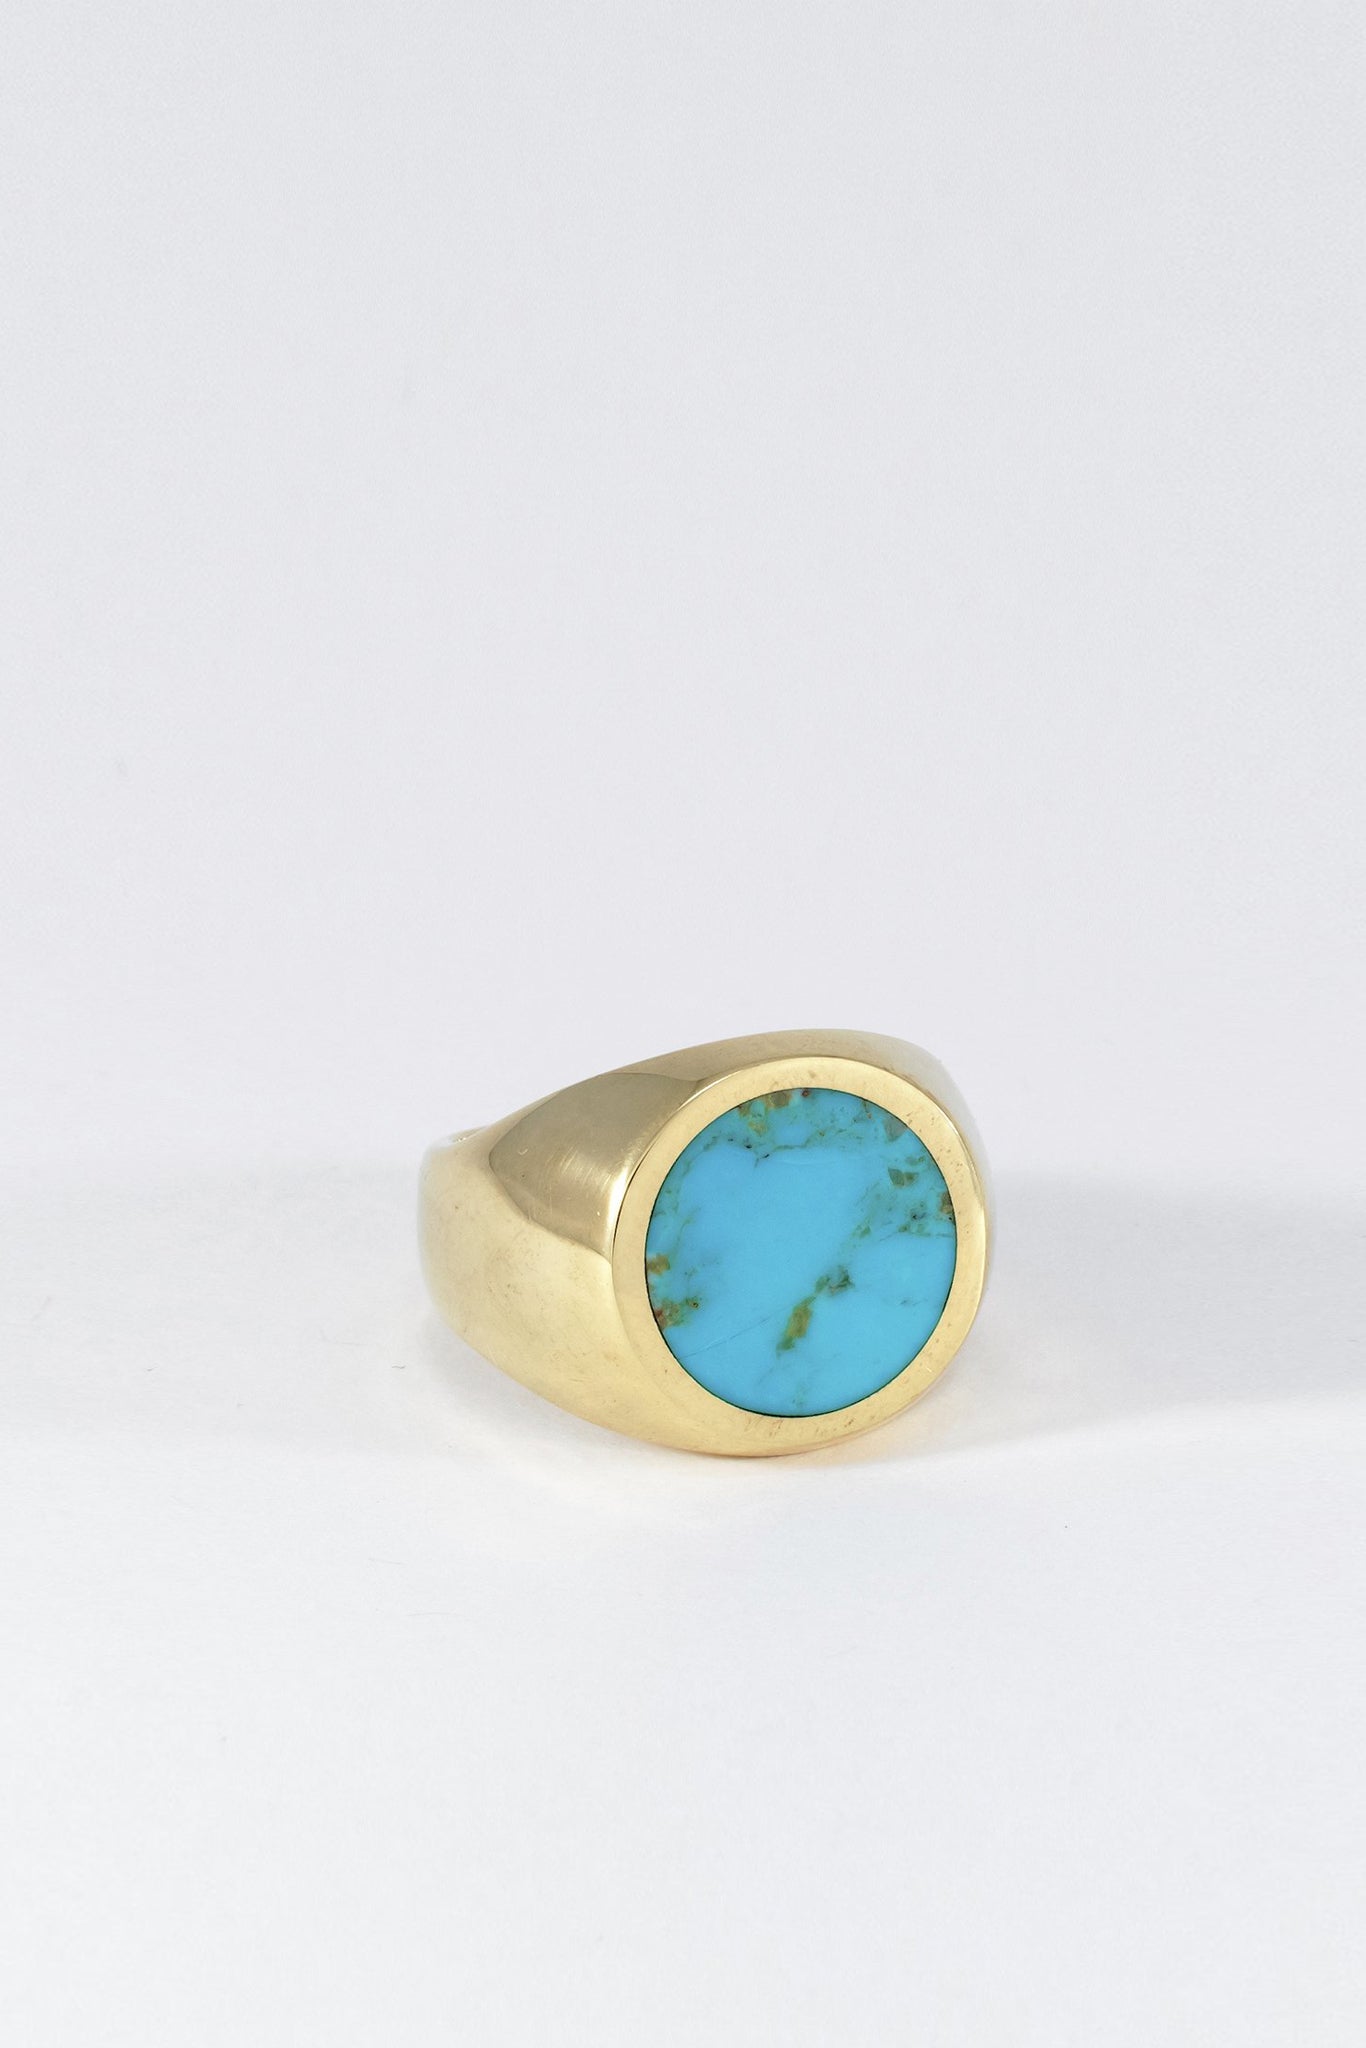 Gold Turquoise Signet Ring - Round